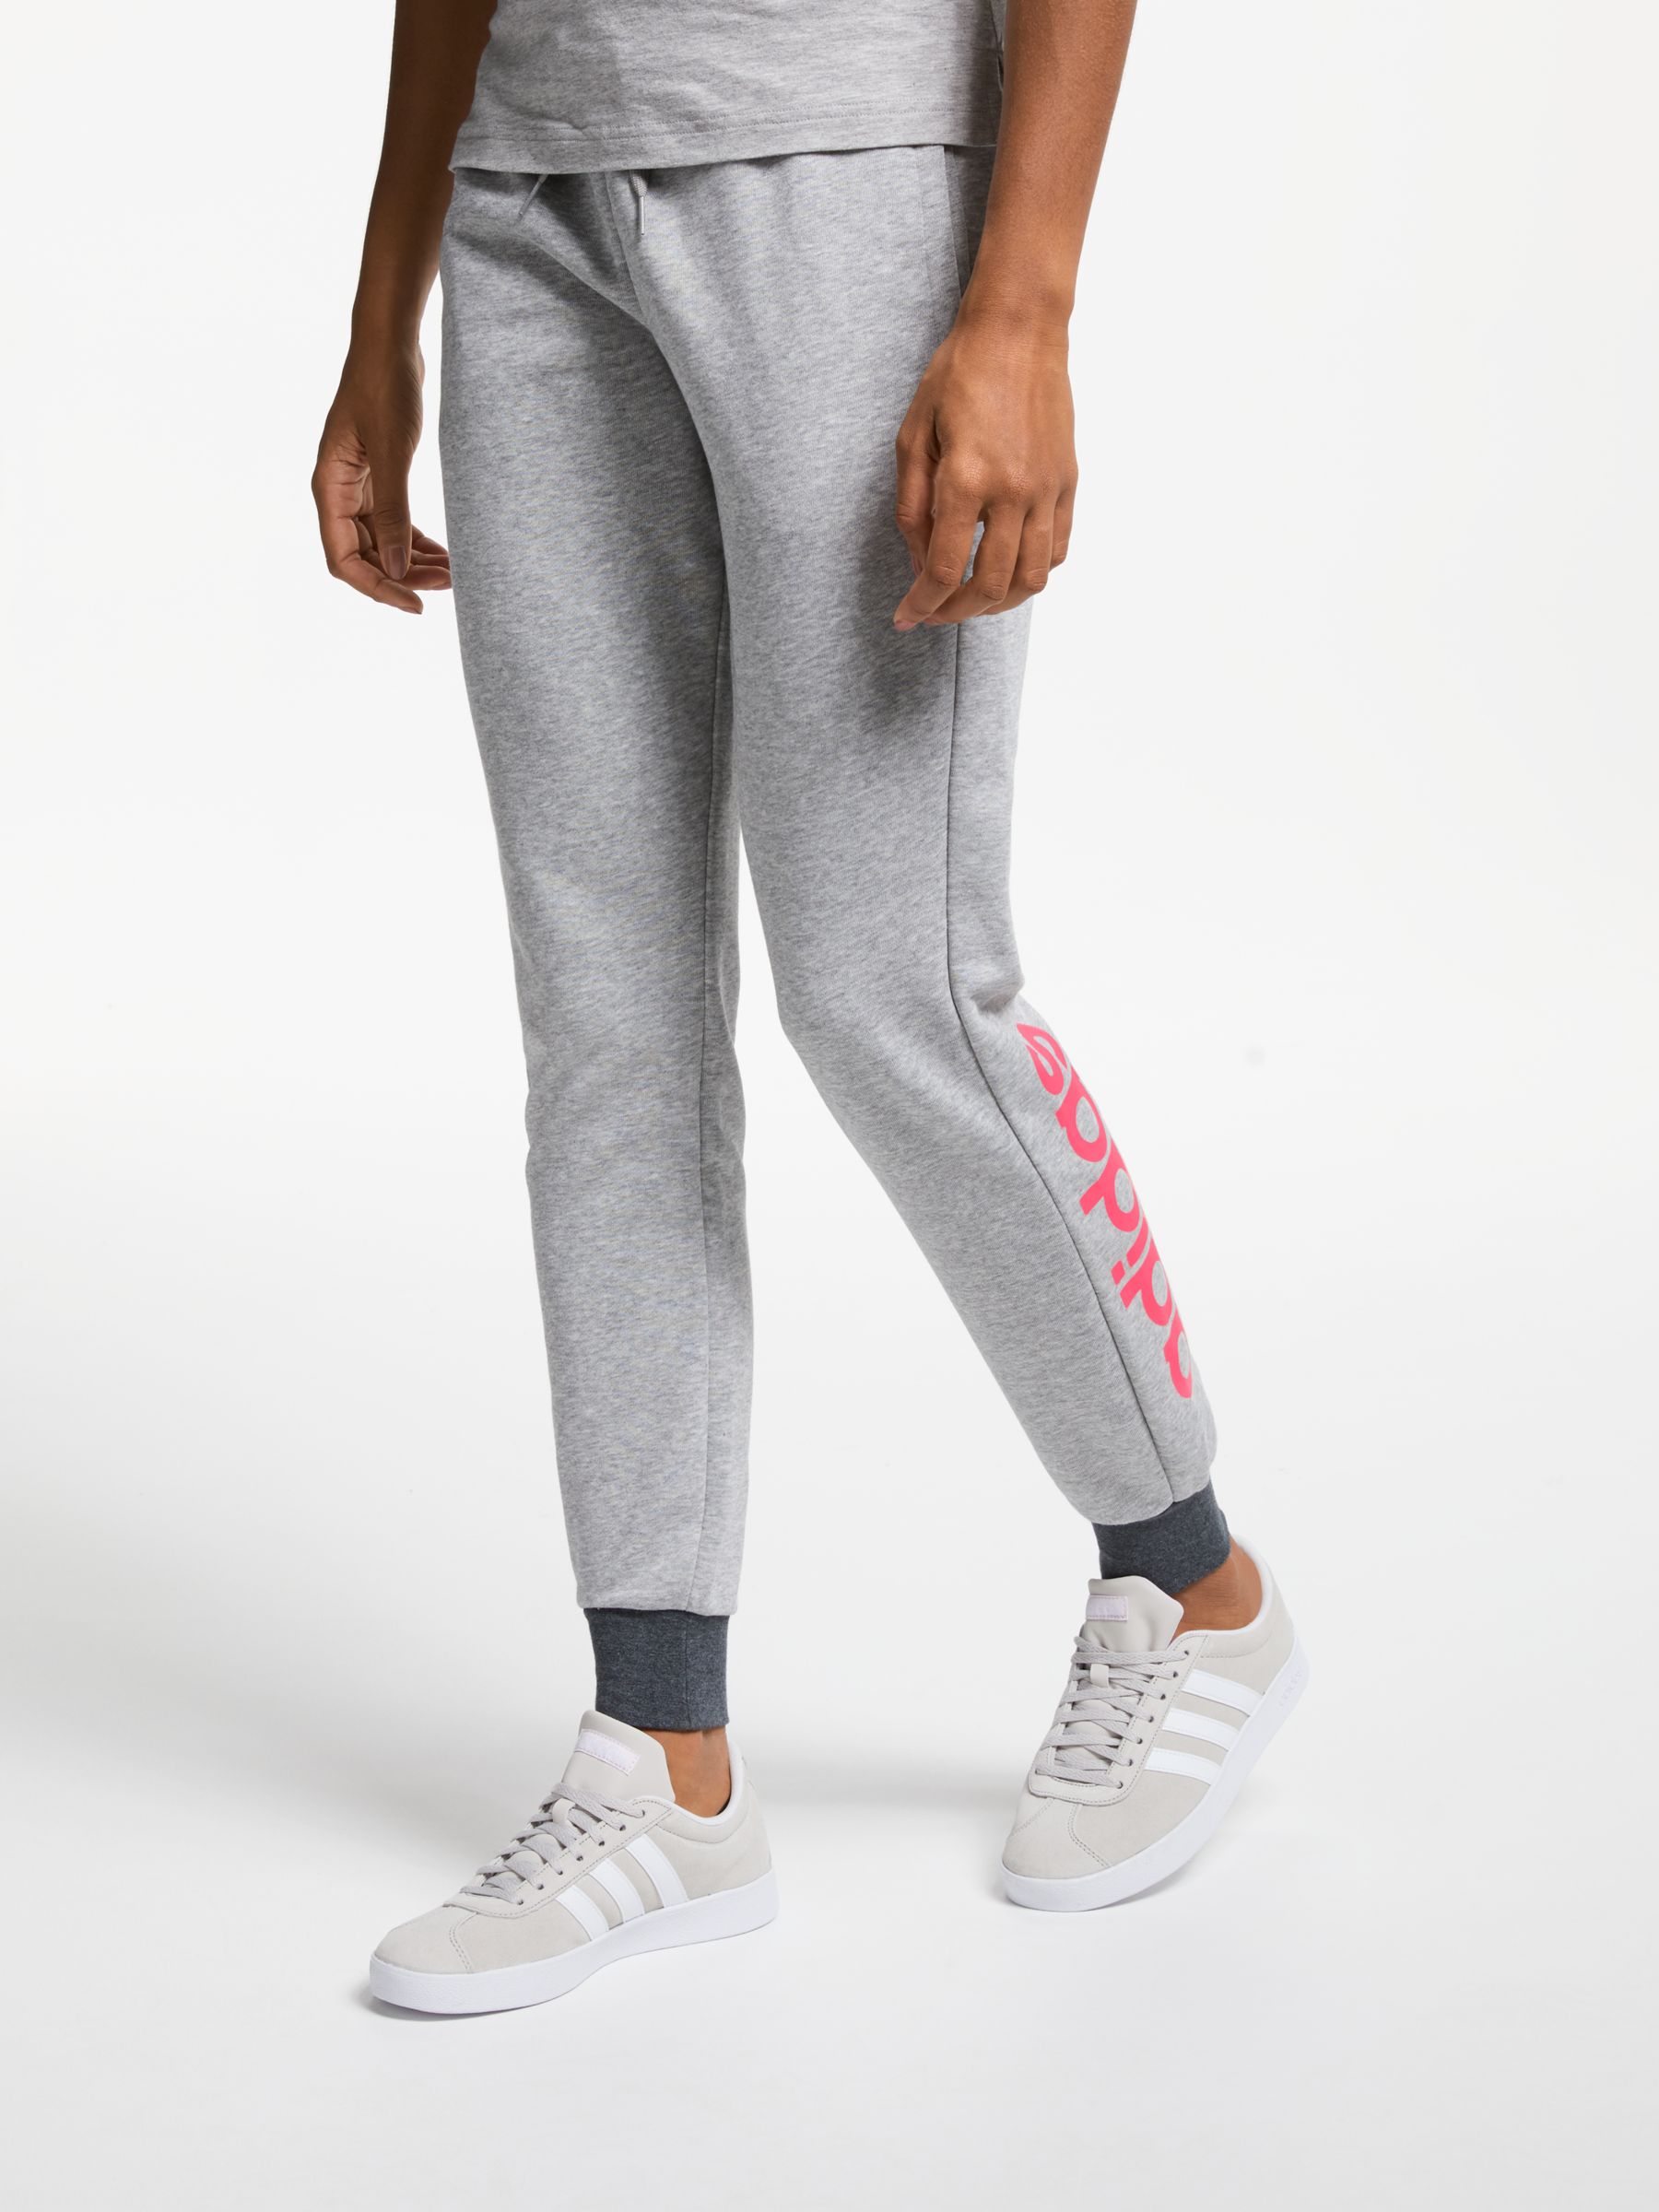 womens grey and pink adidas tracksuit